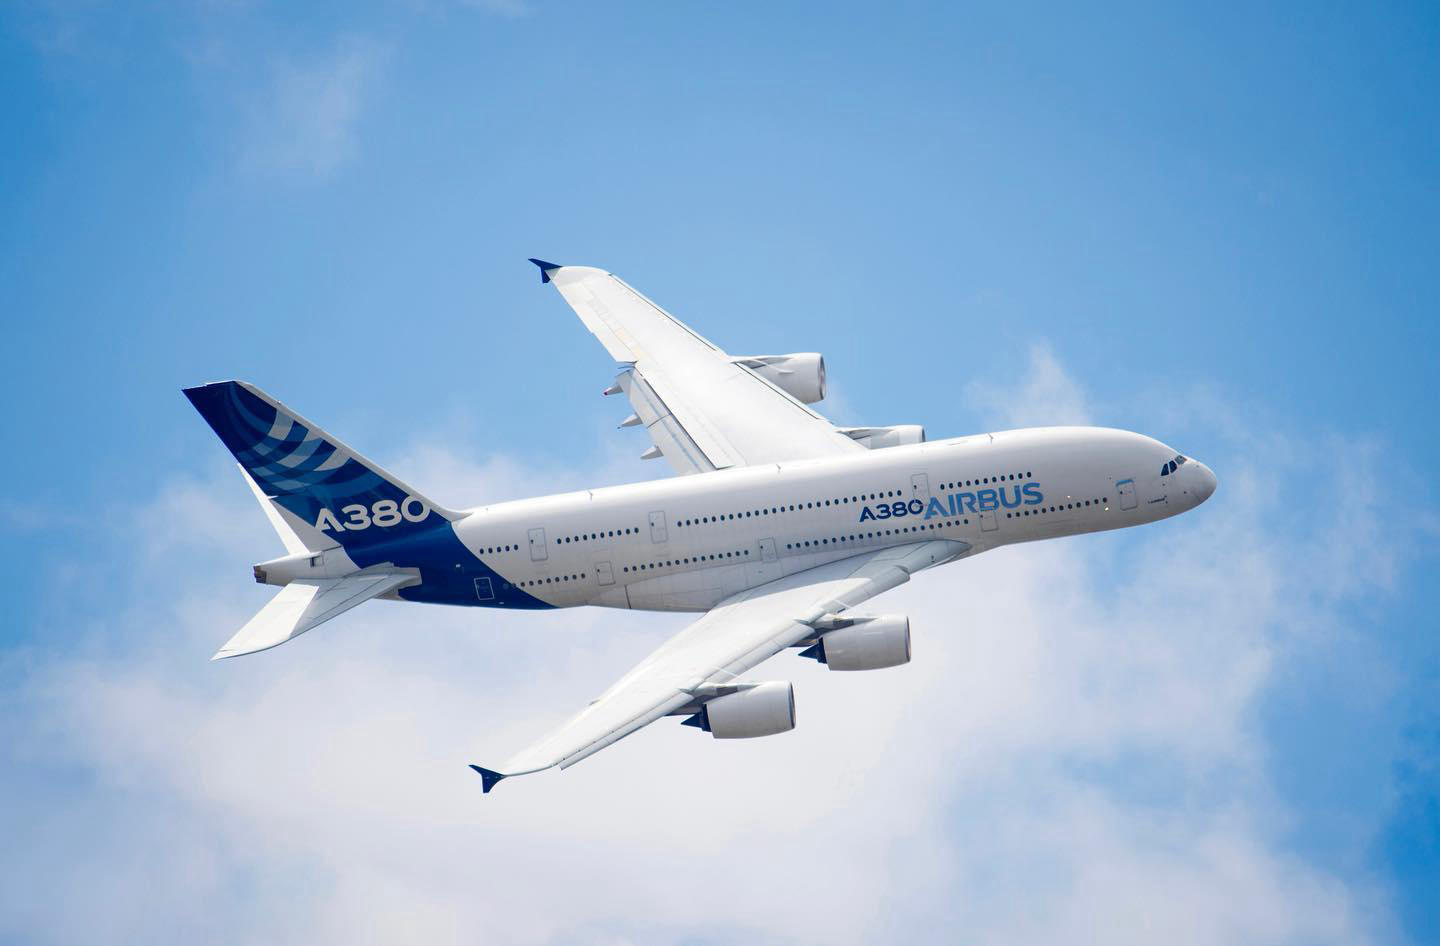 Airbus - Join the #A380 auction and get your own piece of this iconic legend